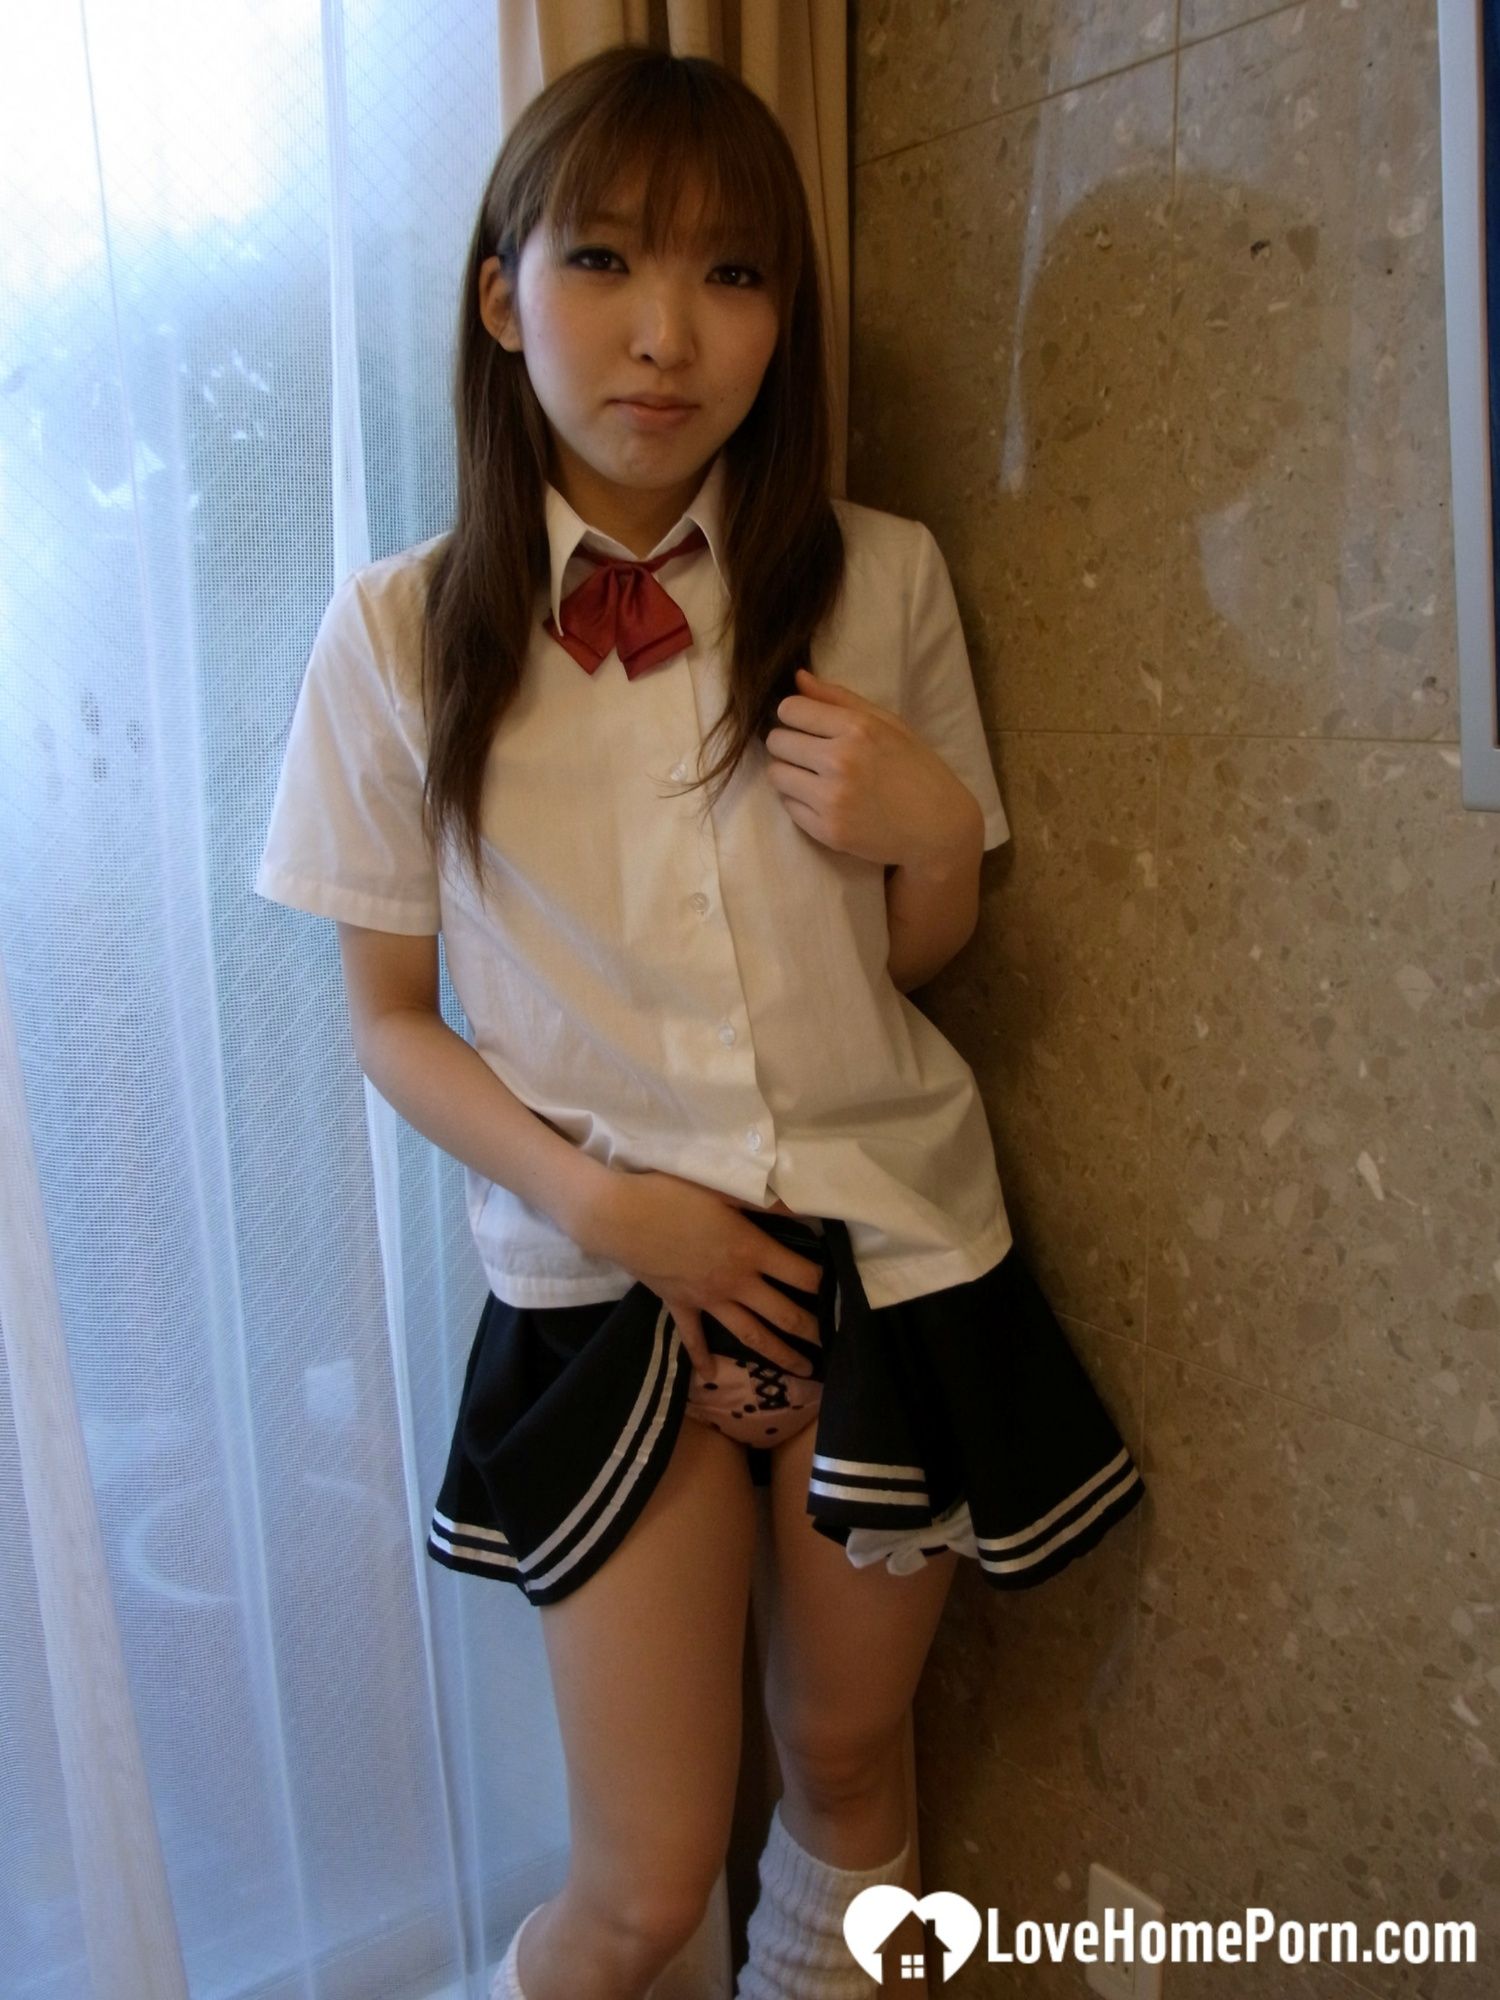 Stunning schoolgirl craves for a fucking session